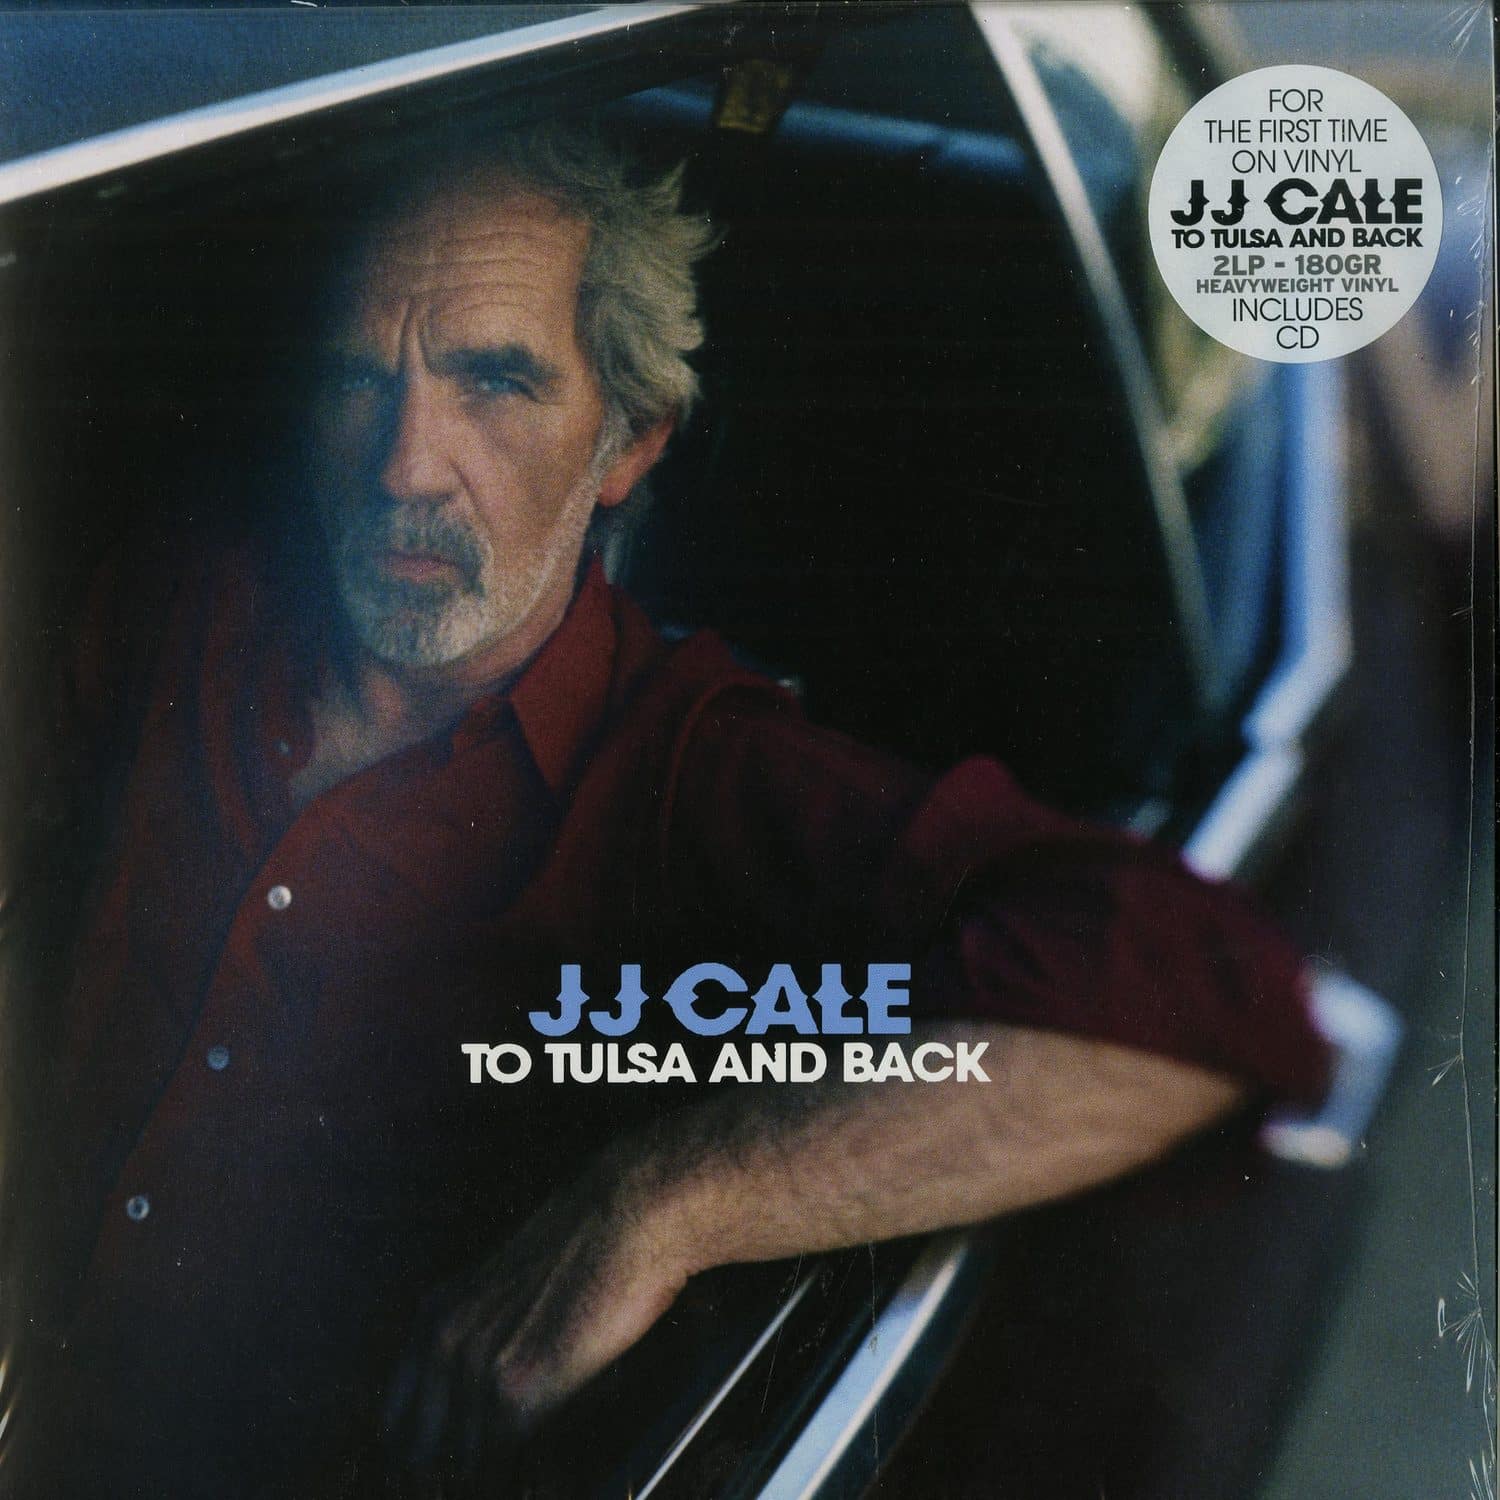 JJ Cale - TO TULSA AND BACK 